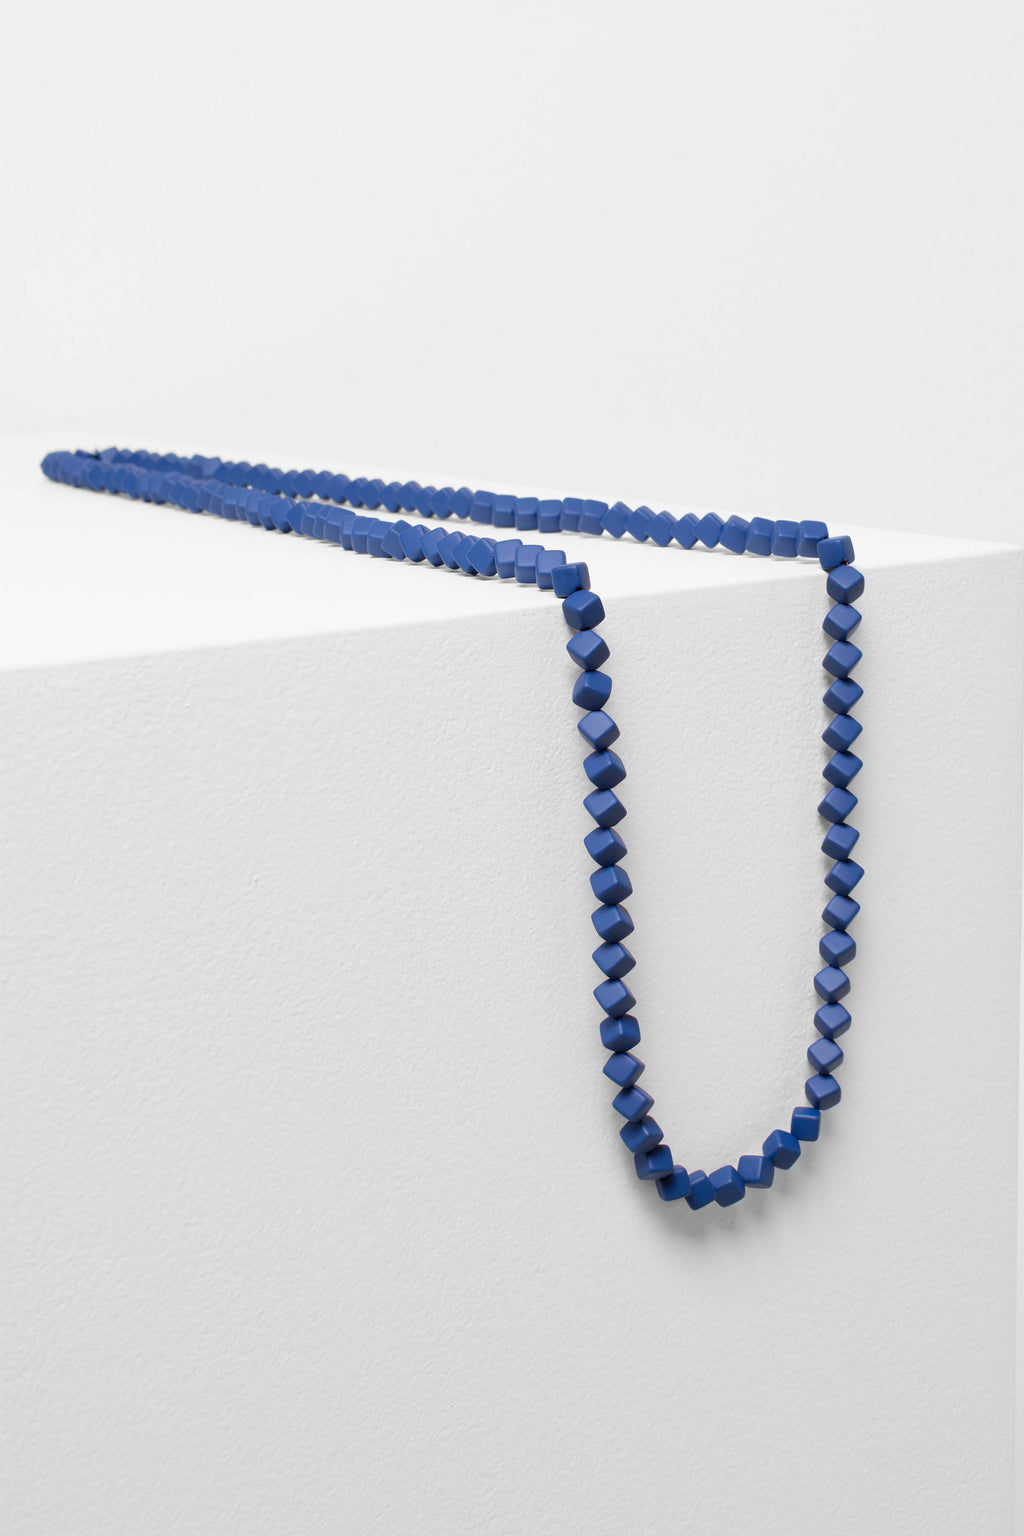 Solle Necklace in Electric Blue by Elk the Label